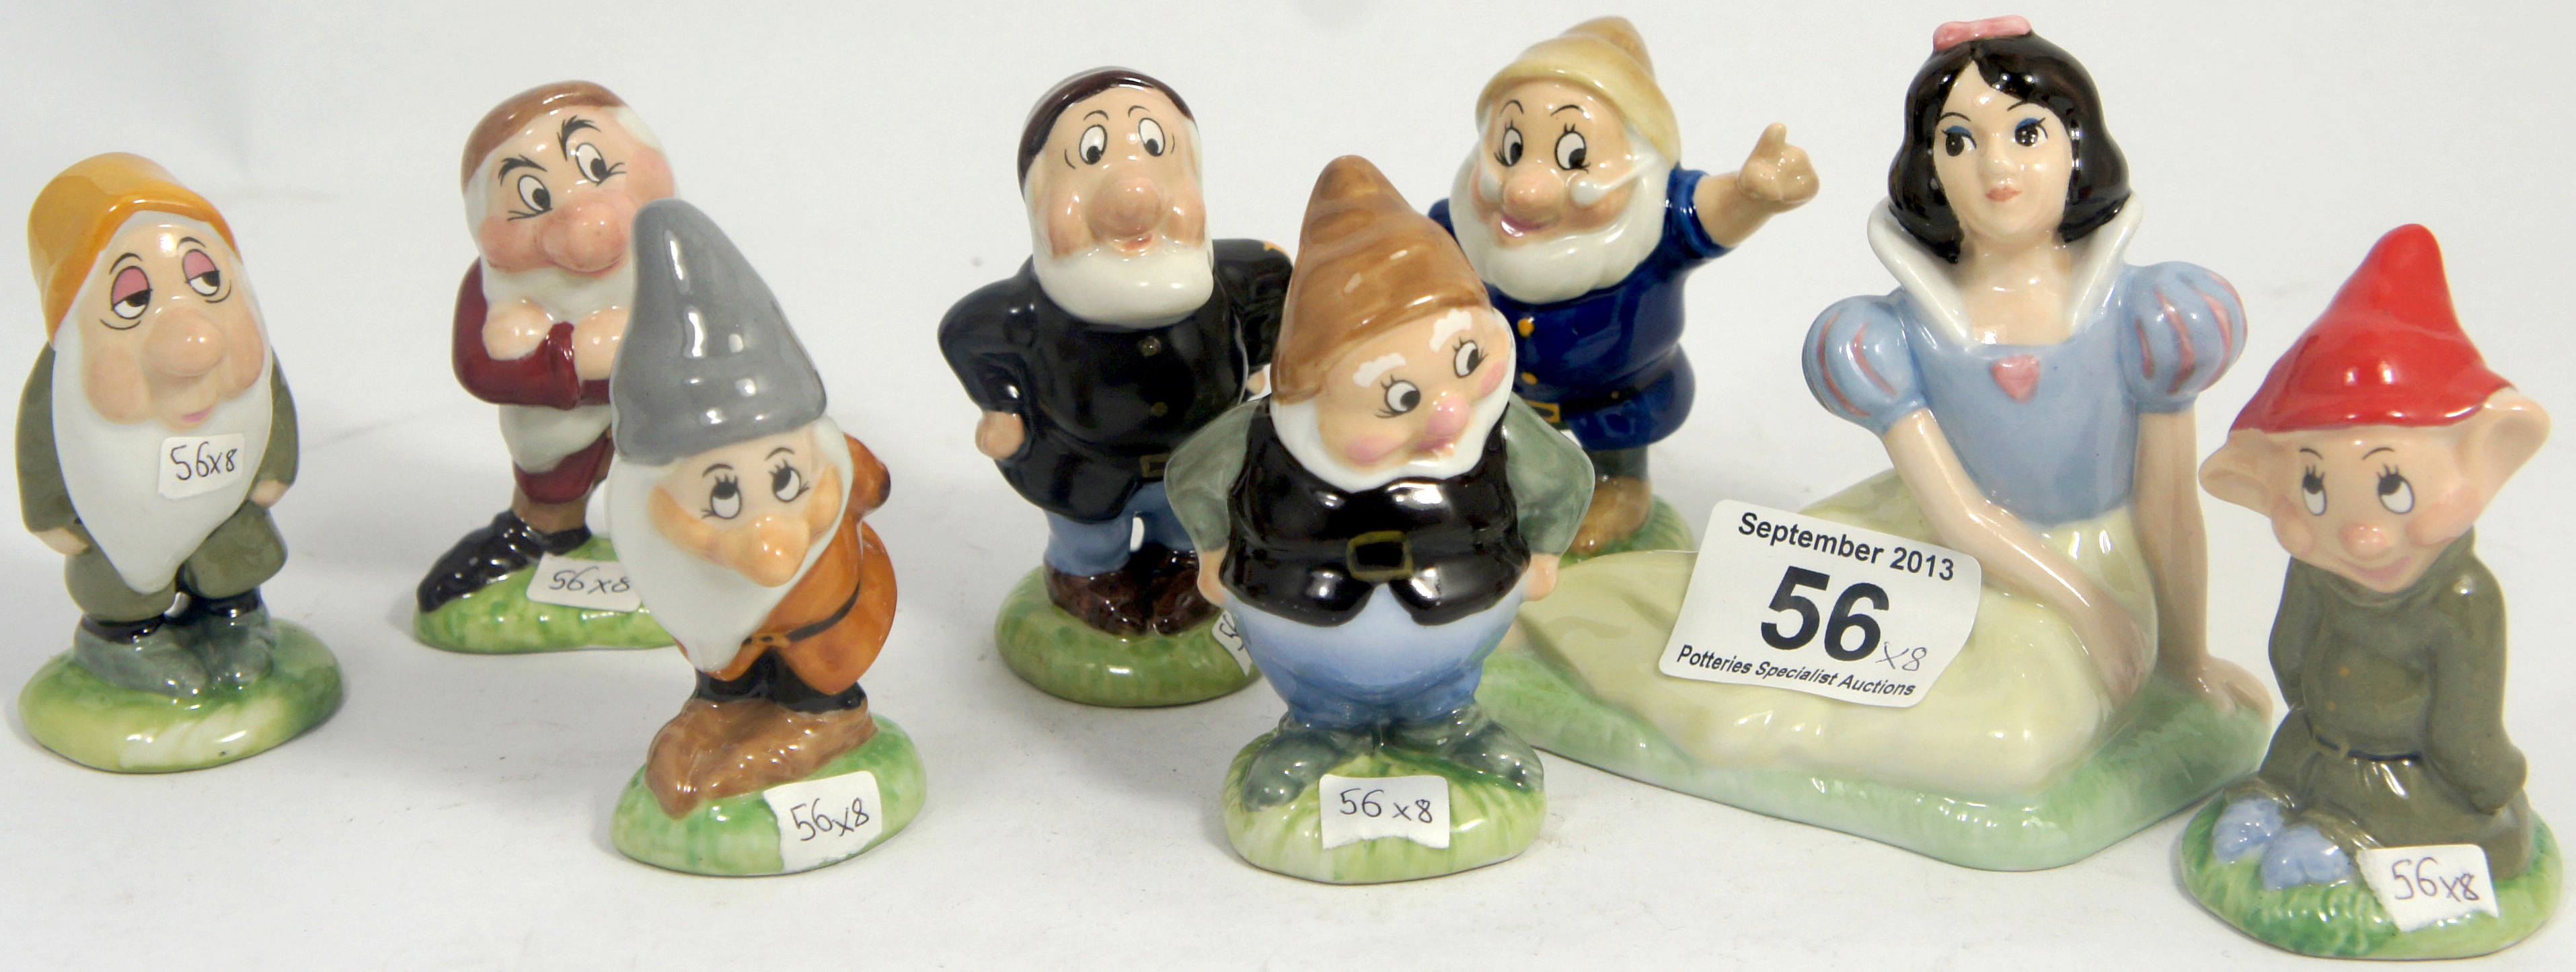 Wade set of Snow White and Severn Dwarfs from Walt Disney Collection, second version  (8)